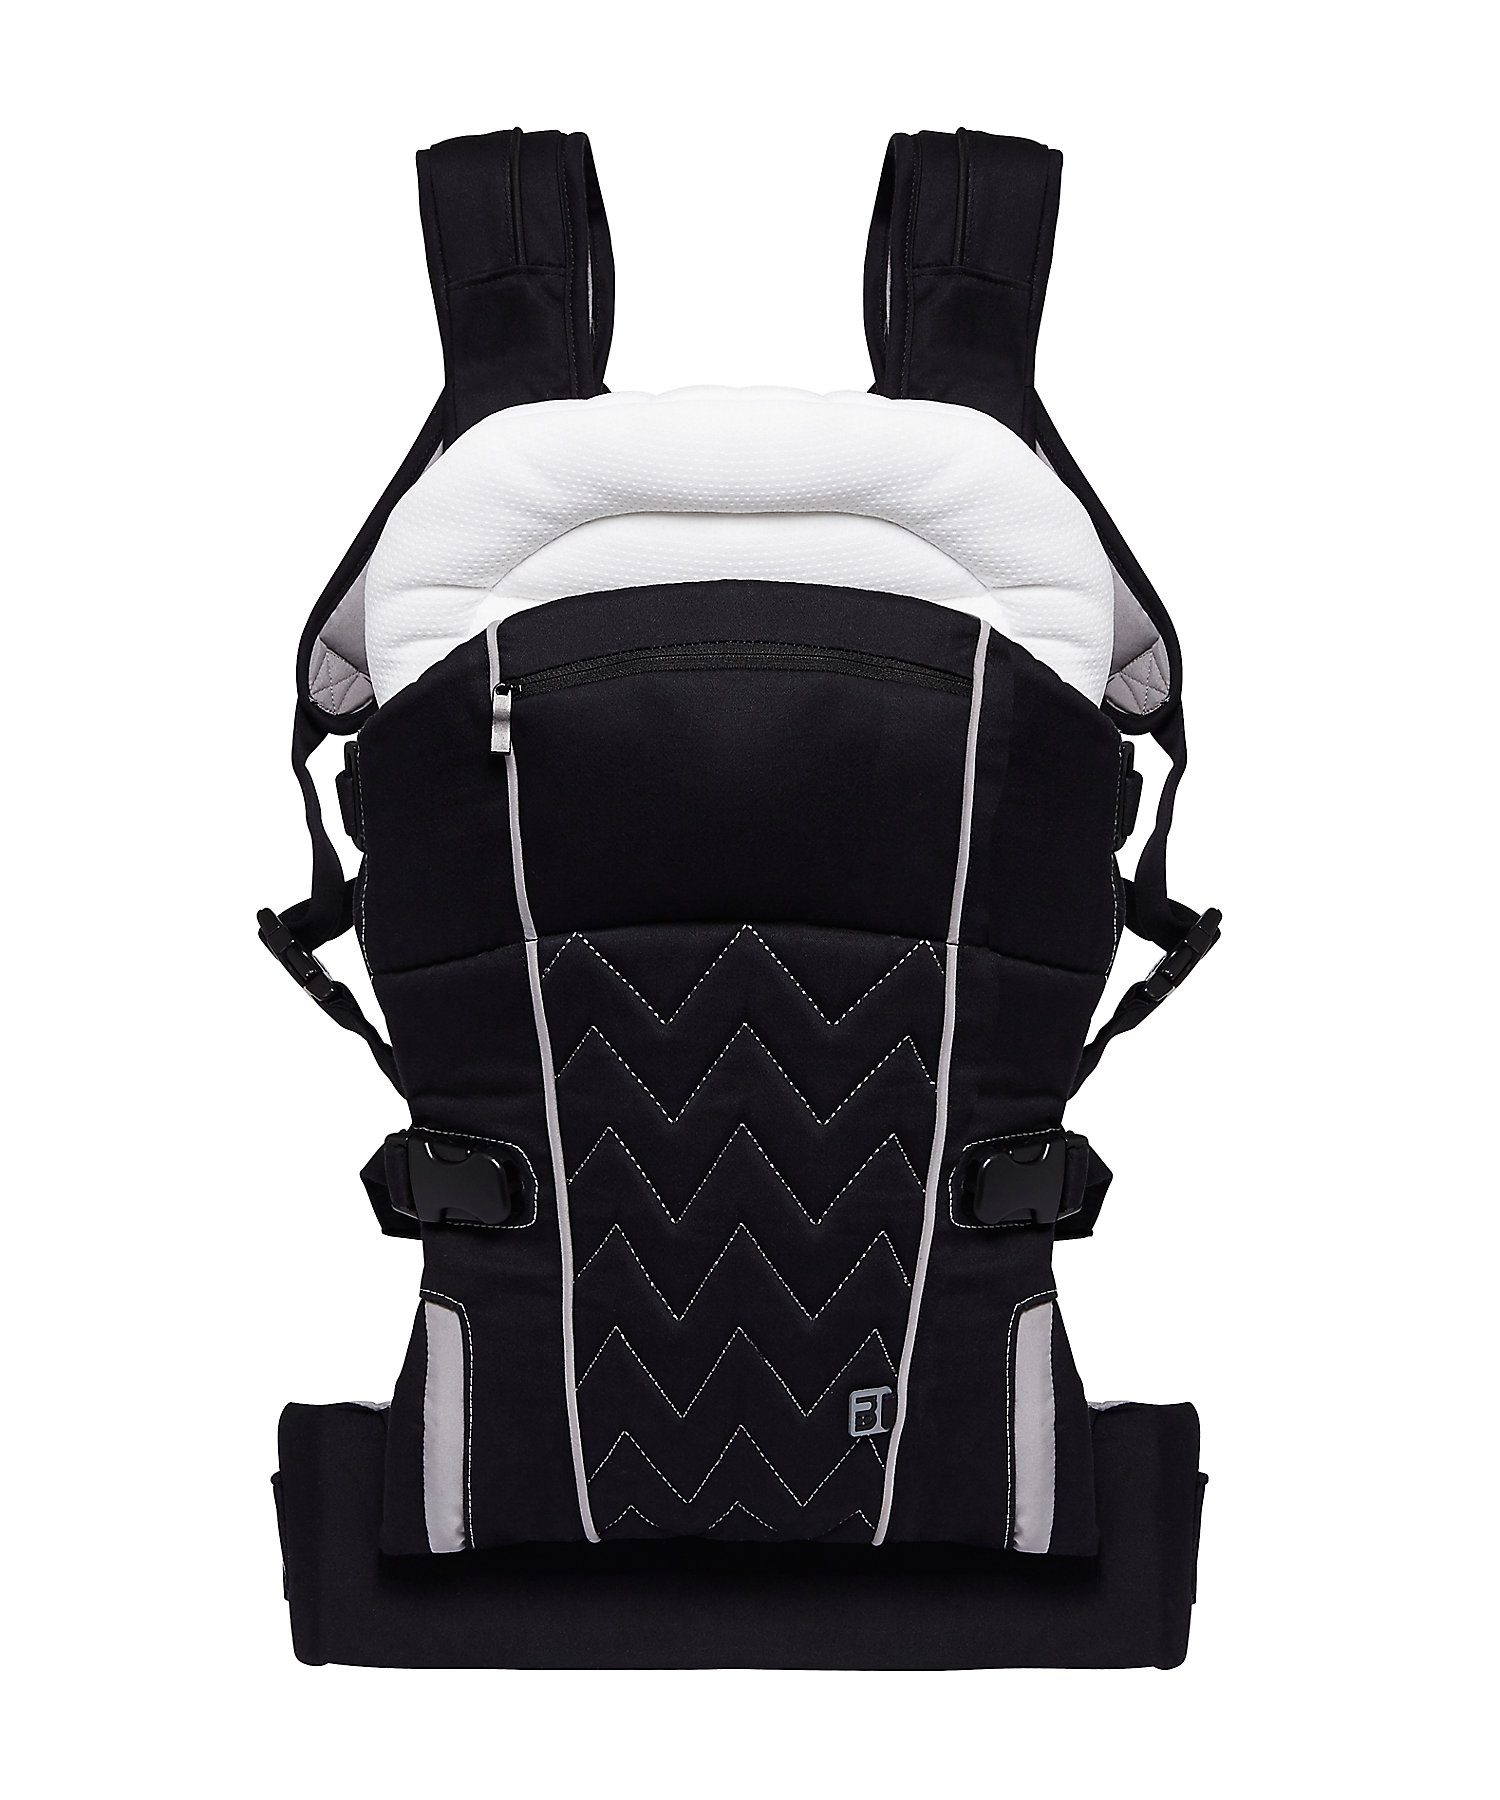 Mothercare | 4 Position Baby Carrier - Black